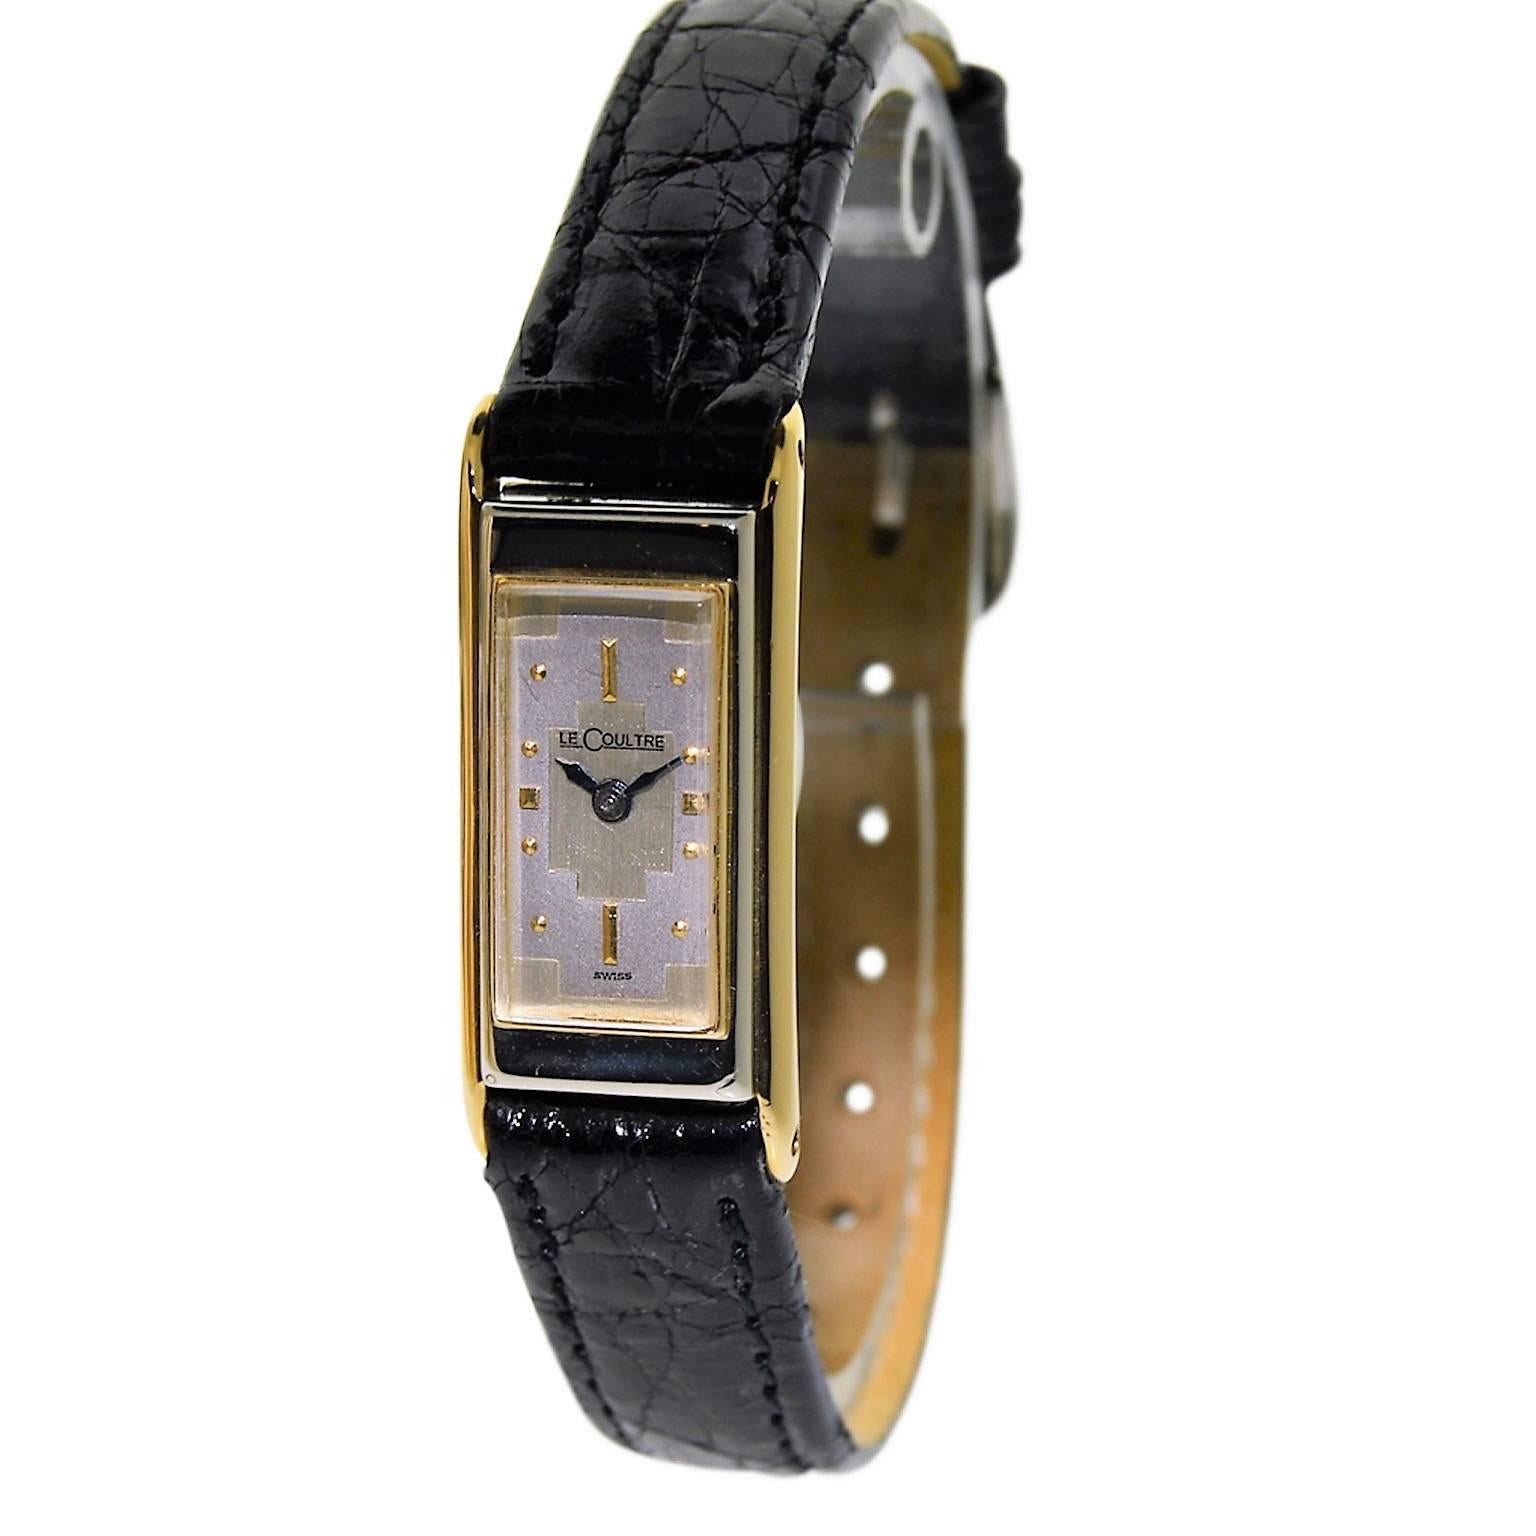 Art Deco Jaeger LeCoultre Ladies White and Yellow Gold Backwinding Duo/Plan Wristwatch